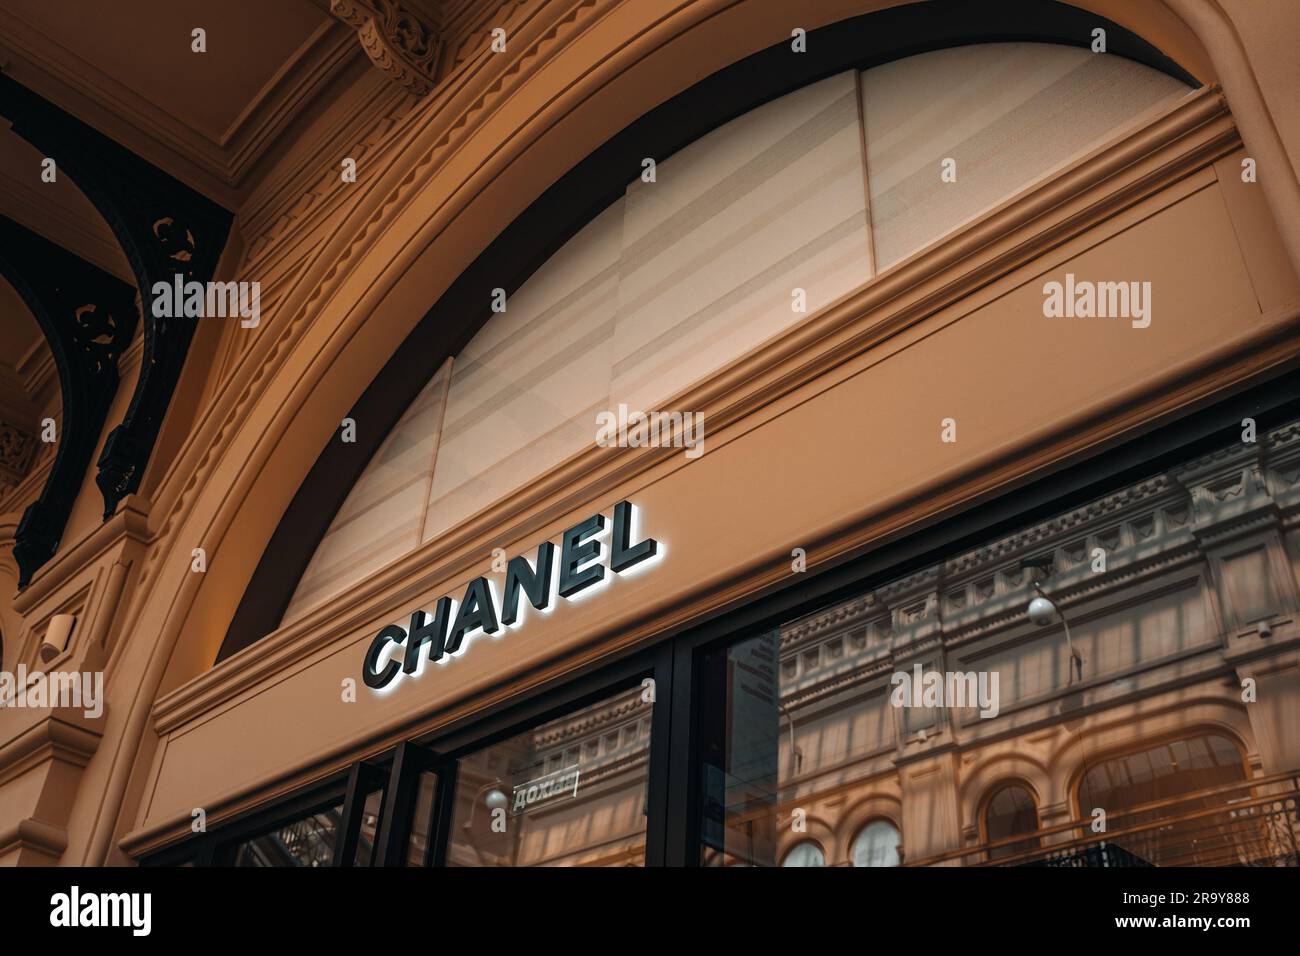 Classy aesthetic Chanel logotype.Boutique entrance. Chanel is a fashion house founded in 1909 specialized in haute couture goods.x Stock Photo